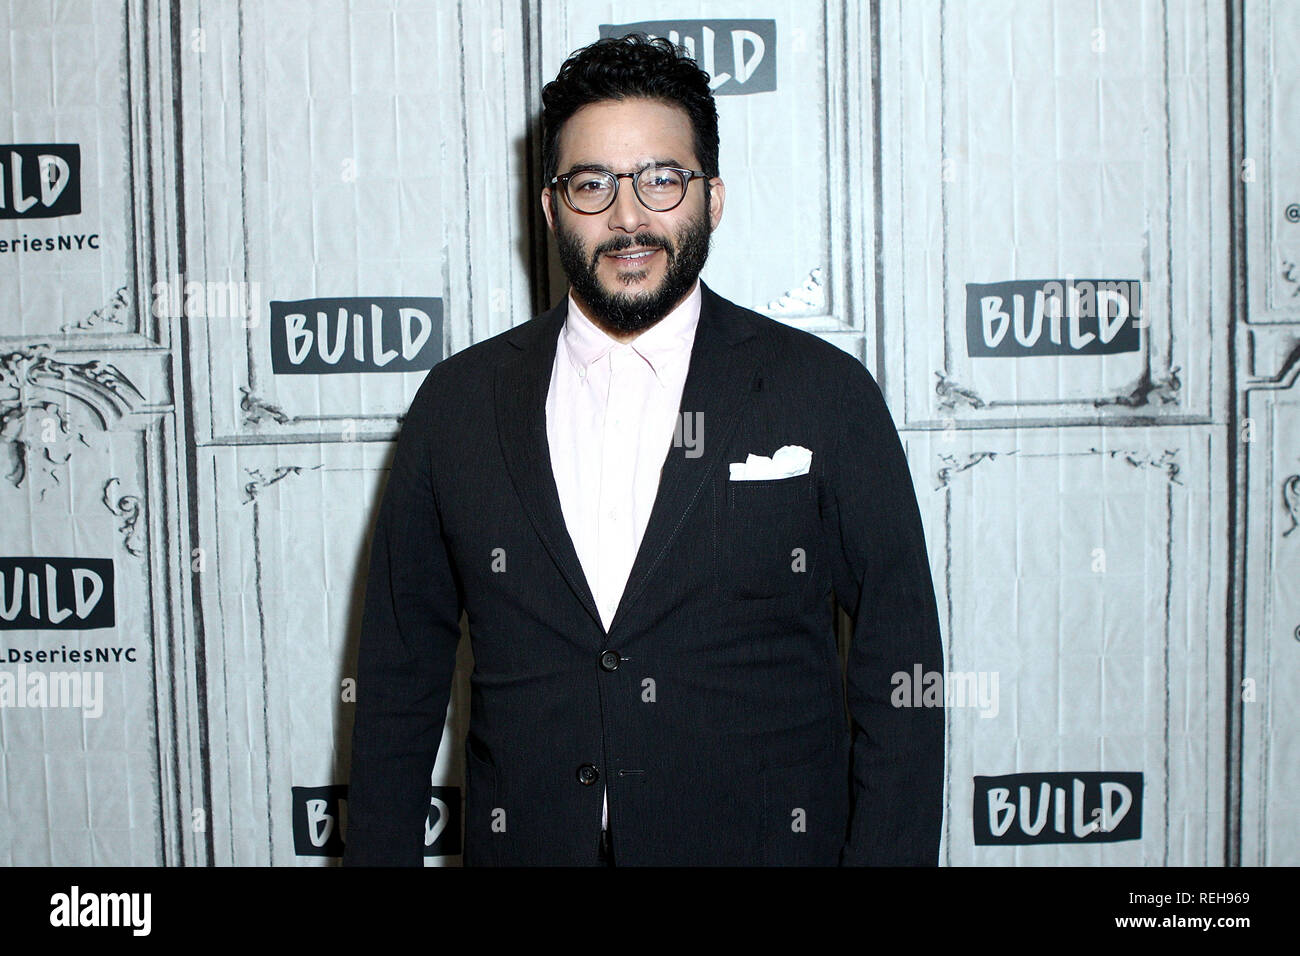 NEW YORK, NY - OCTOBER 19: Ennis Esmer at The Build Series at Build Studio on October 18, 2019 in New York City. (Photo by Steve Mack/S.D. Mack Pictures) Stock Photo